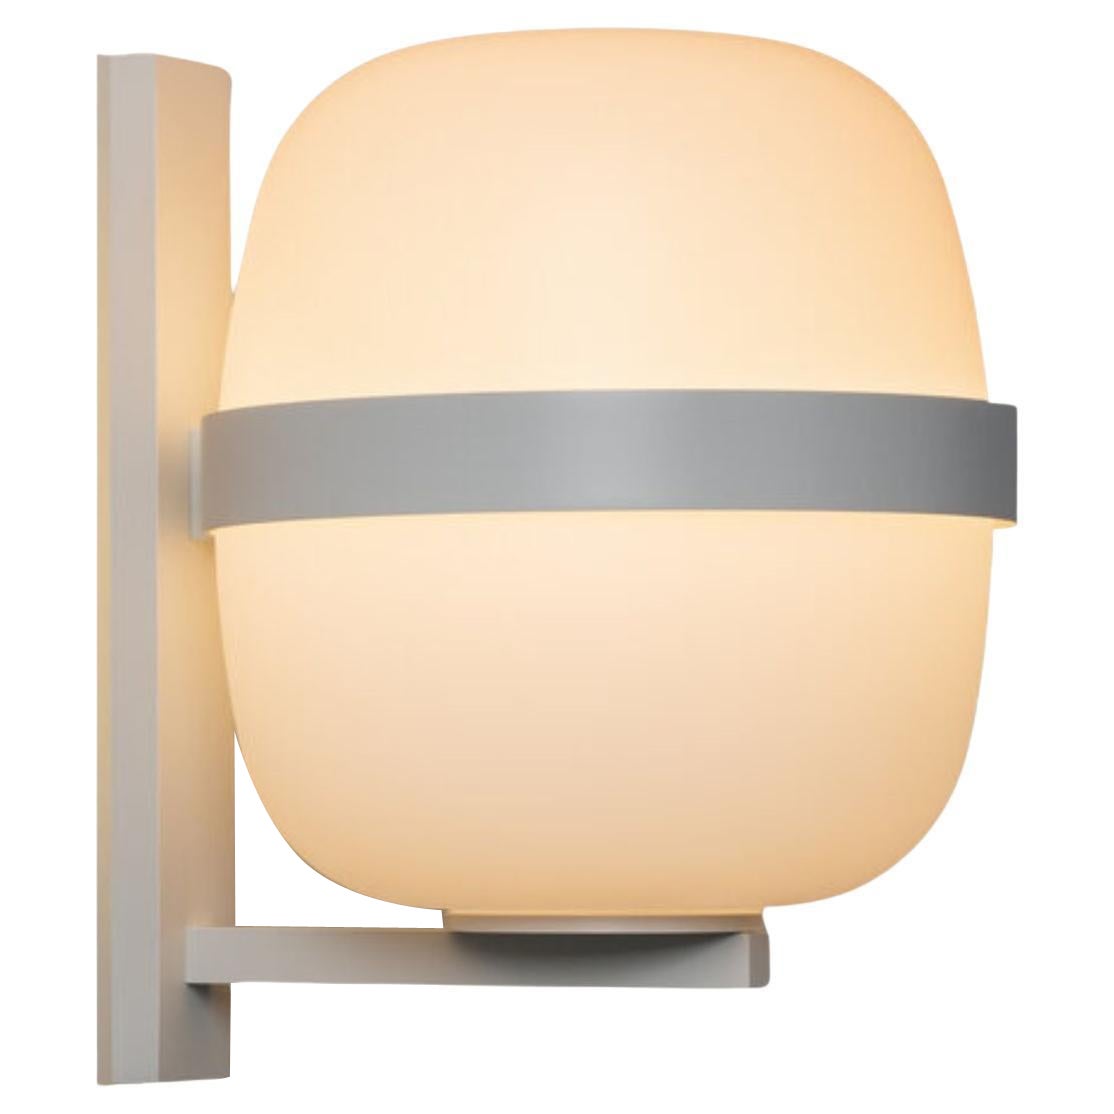 Miguel Milá 'Wally Cesta' Wall Lamp in Opal and White for Santa & Cole